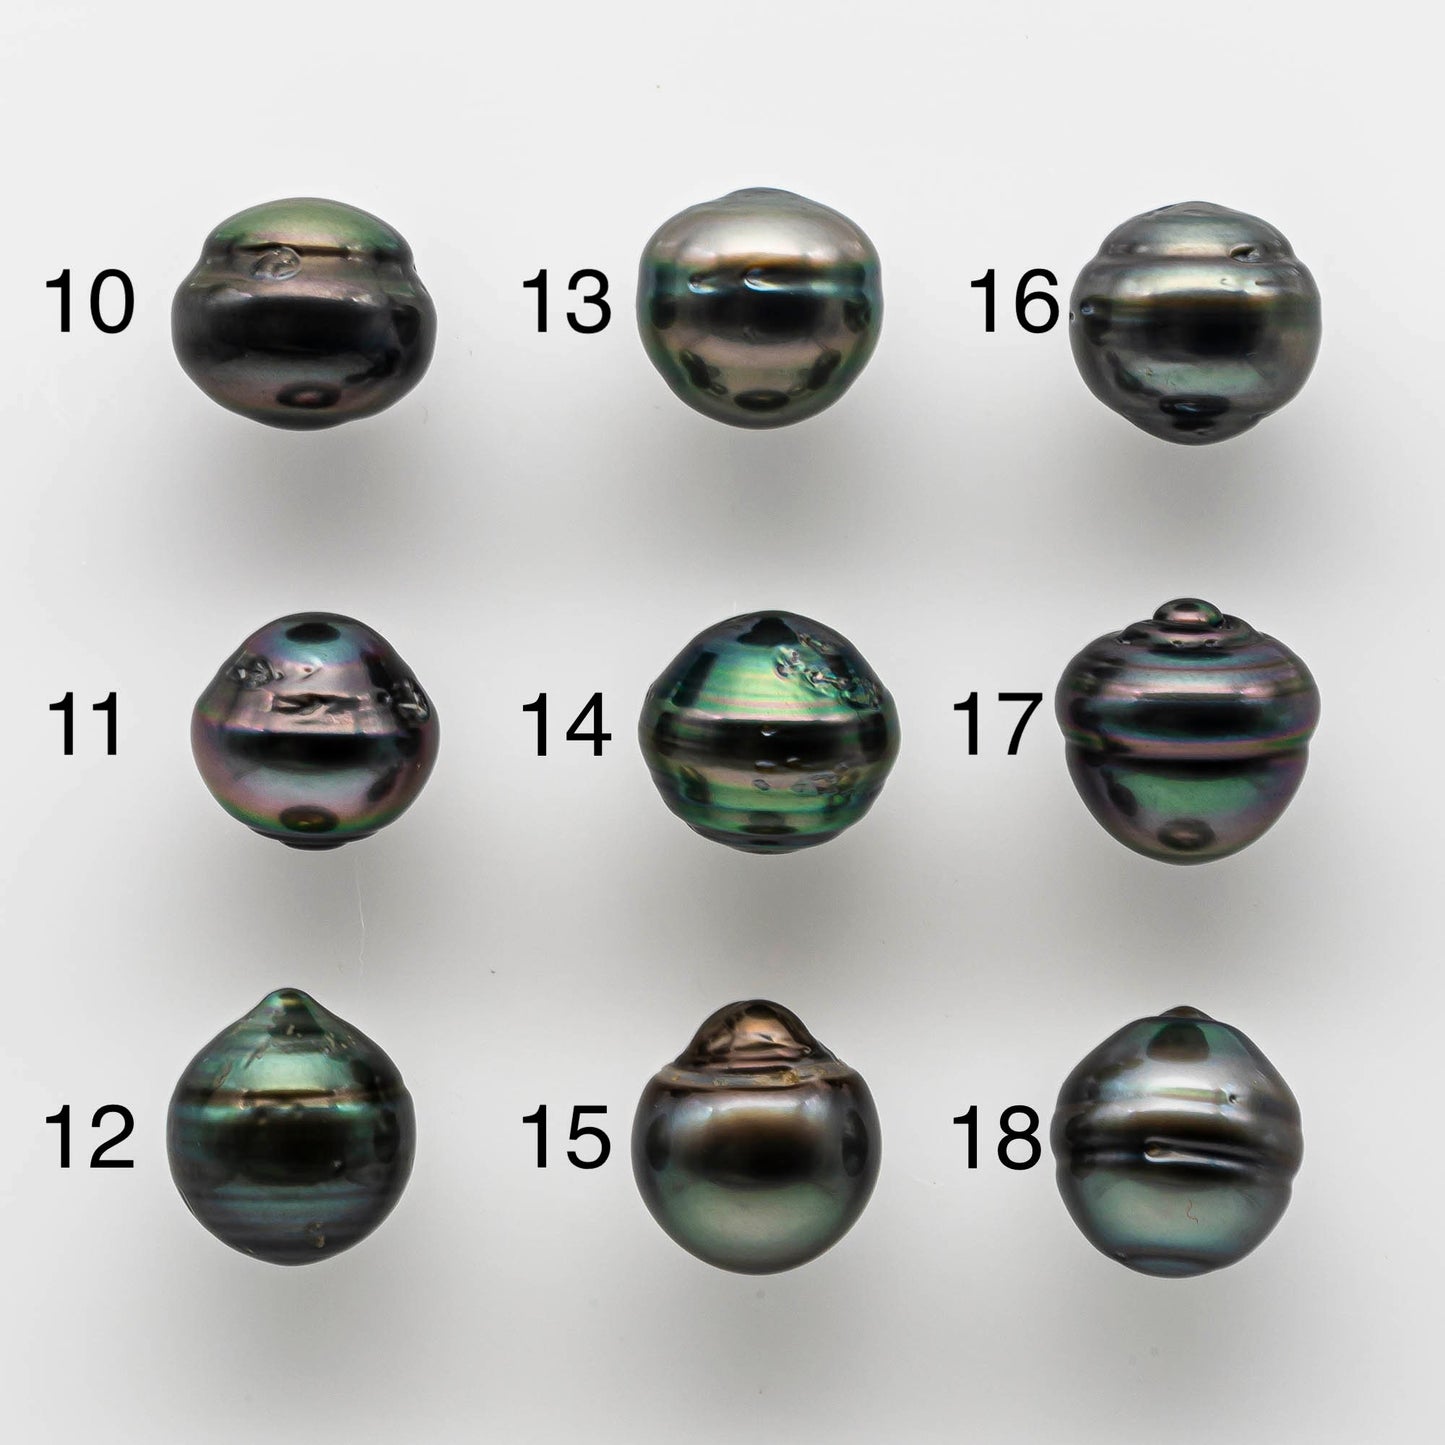 12-13mm Single Tahitian Pearl Bead Drop Undrilled in High Luster and Natural Color, Half or Full Drilled to Large Hole, SKU # 1657TH